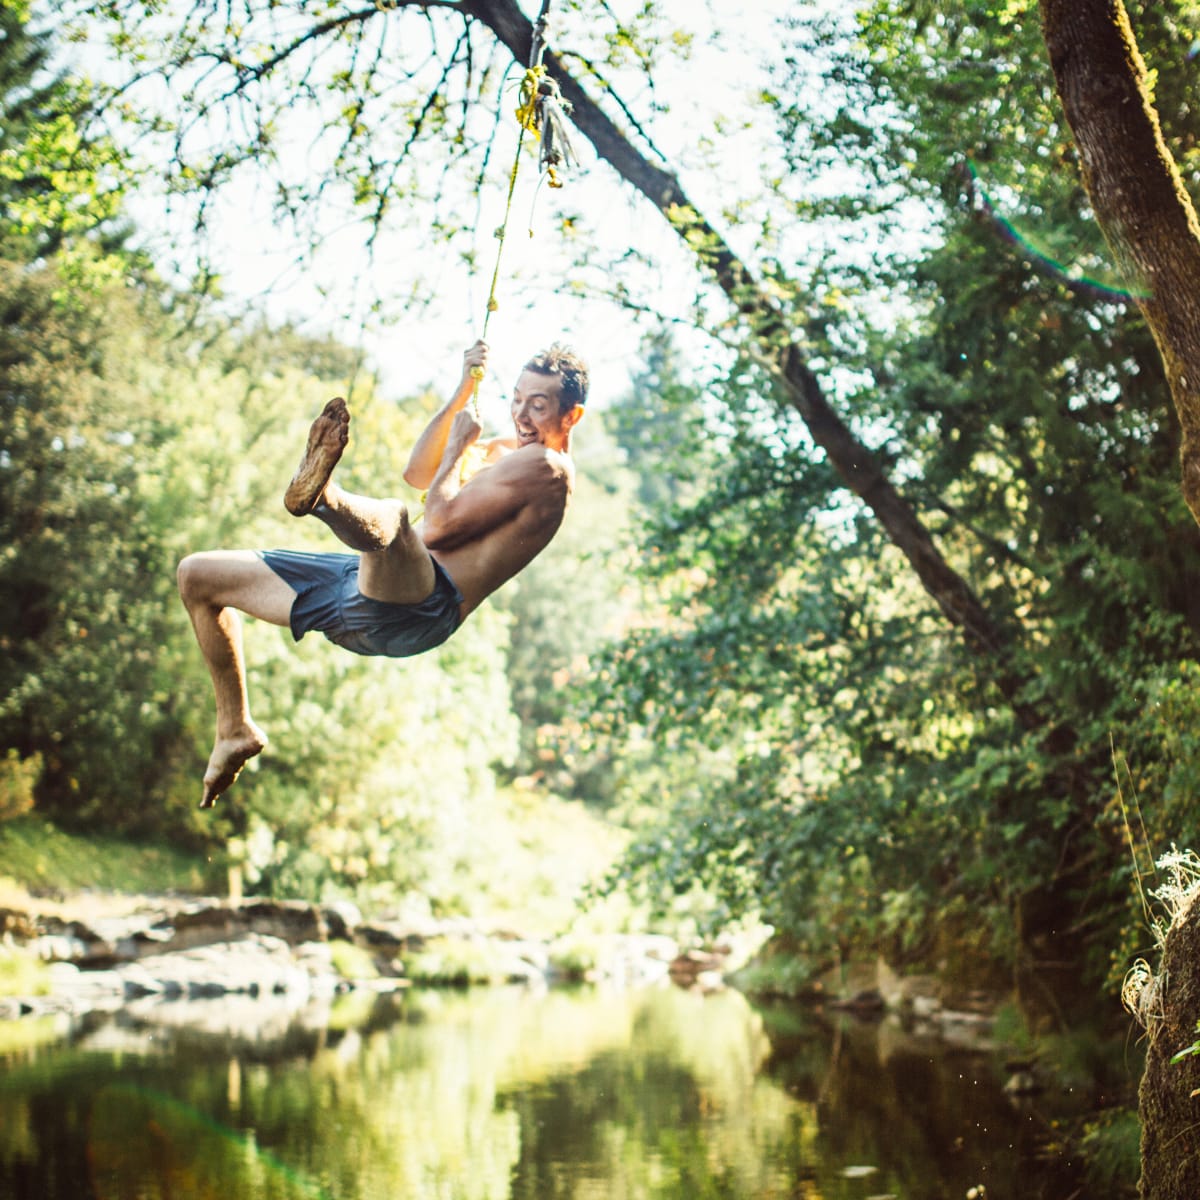 The Easiest Way to Build the Perfect Rope Swing - Men's Journal